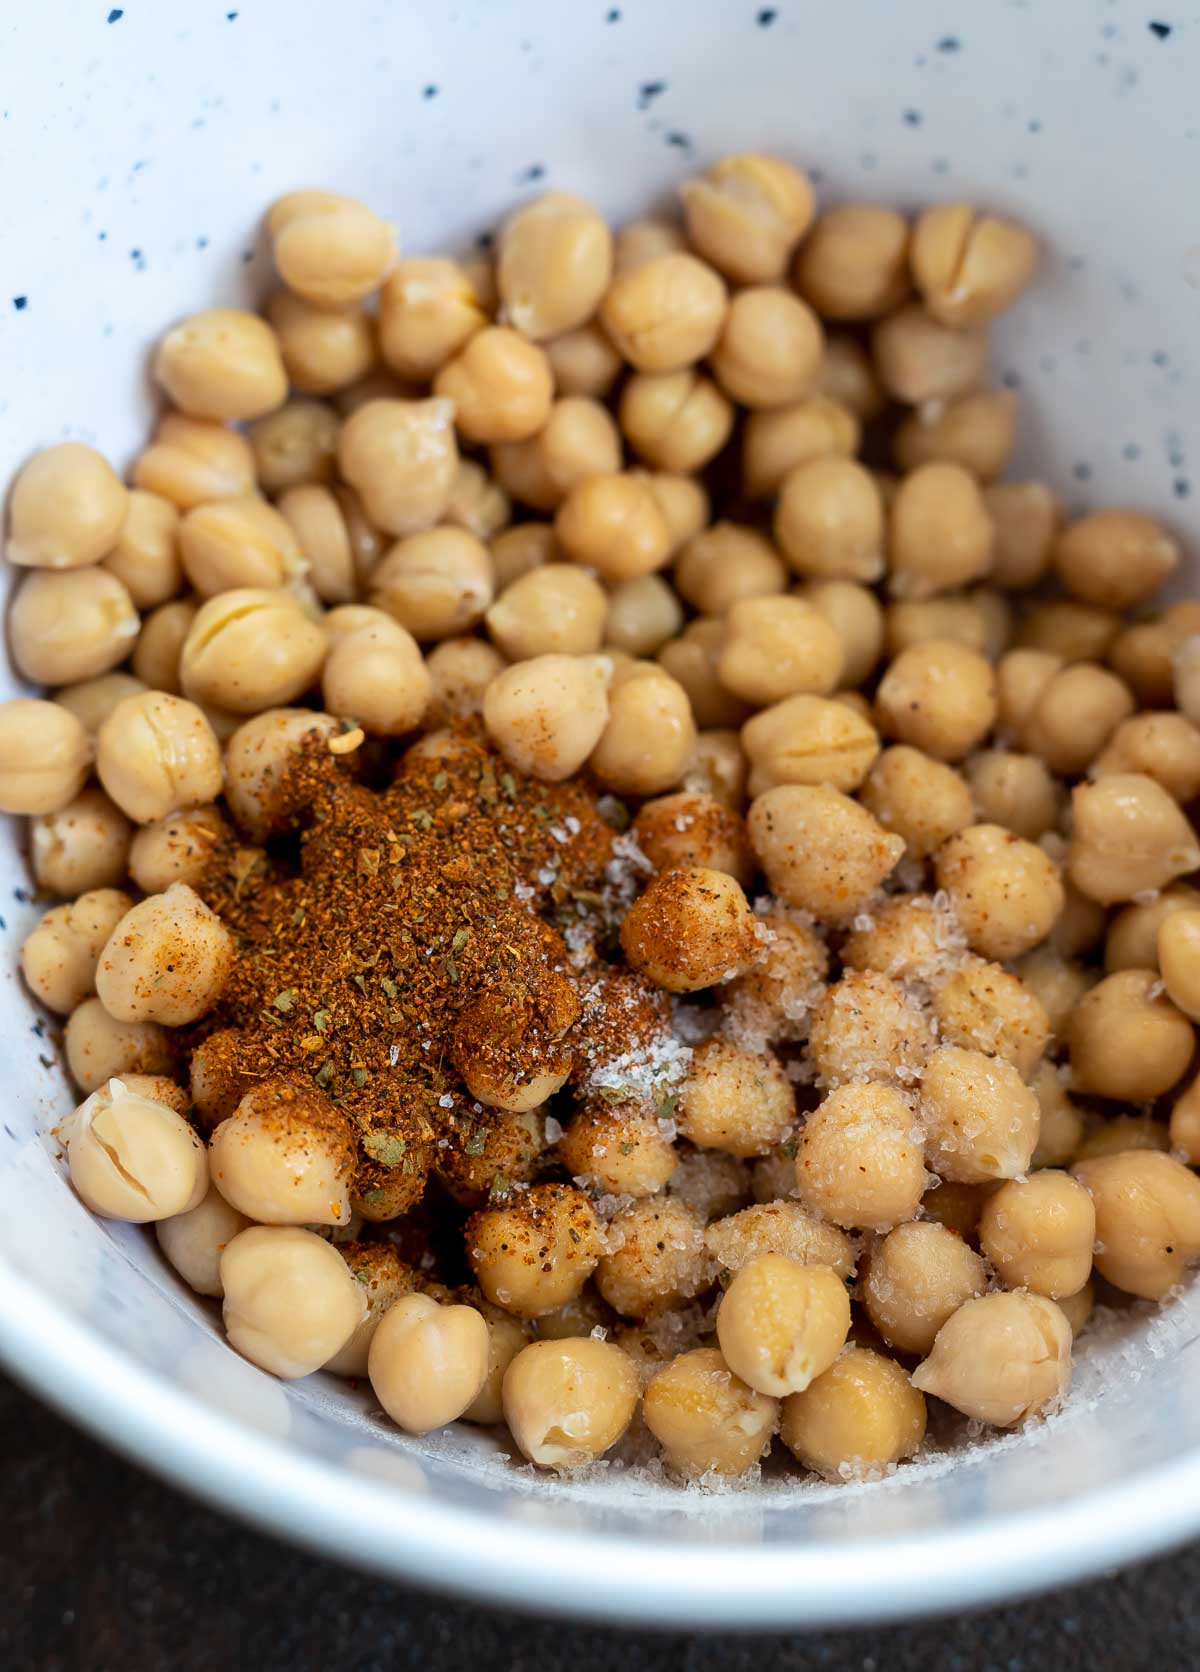 drained chickpeas and seasoning in white mixing bowl